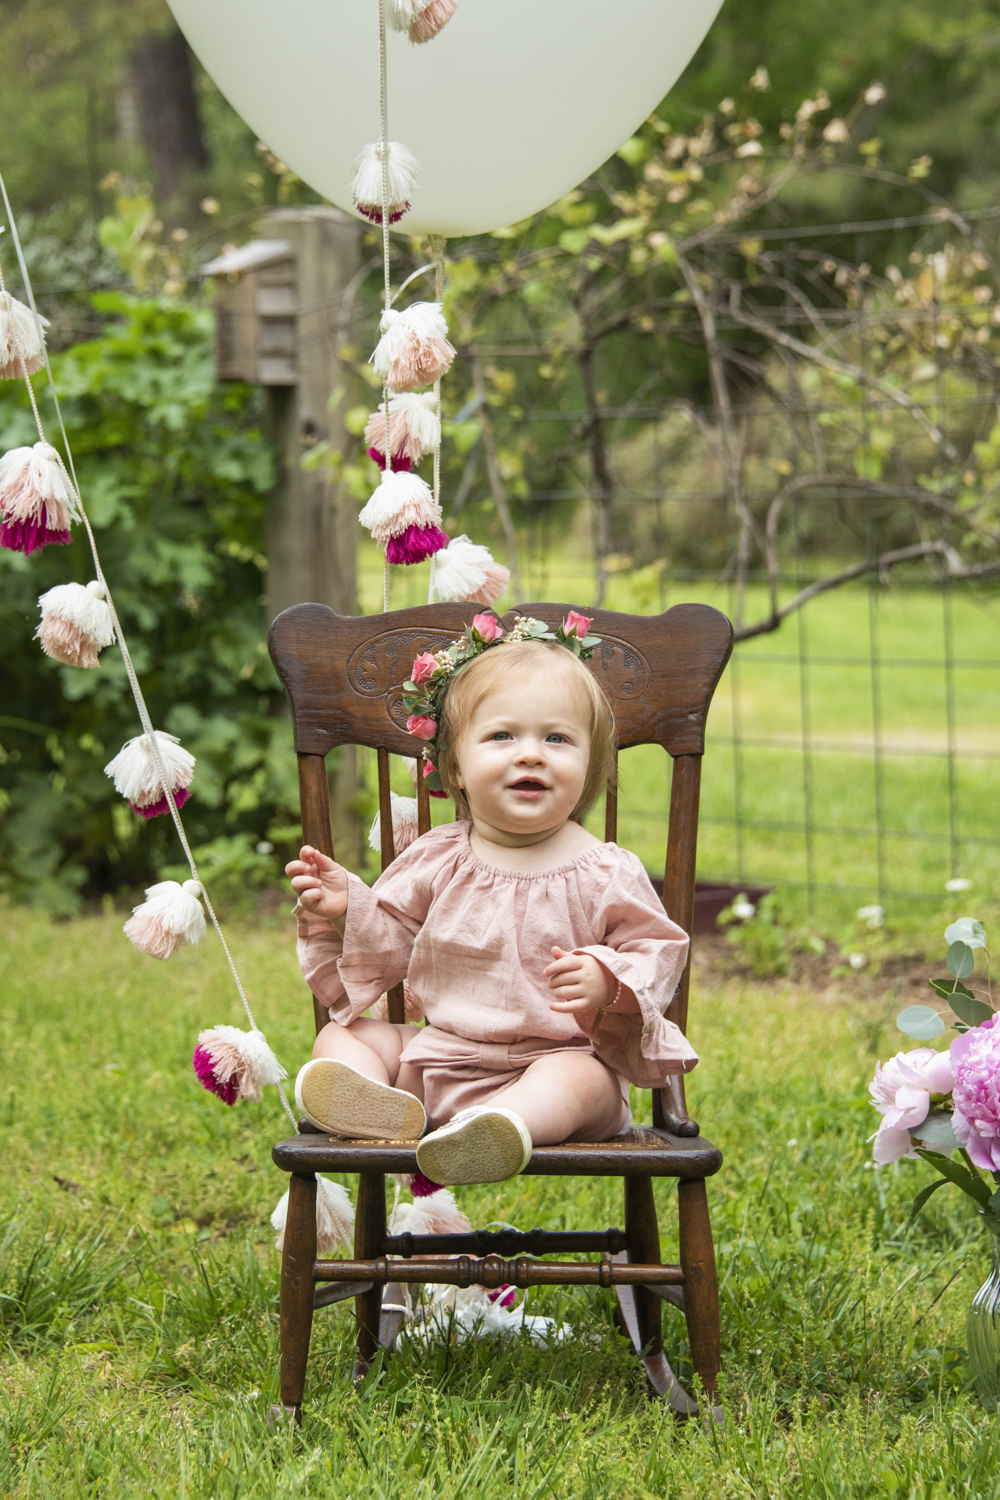 One year old girl during birthday photos sitting in chair with big balloons